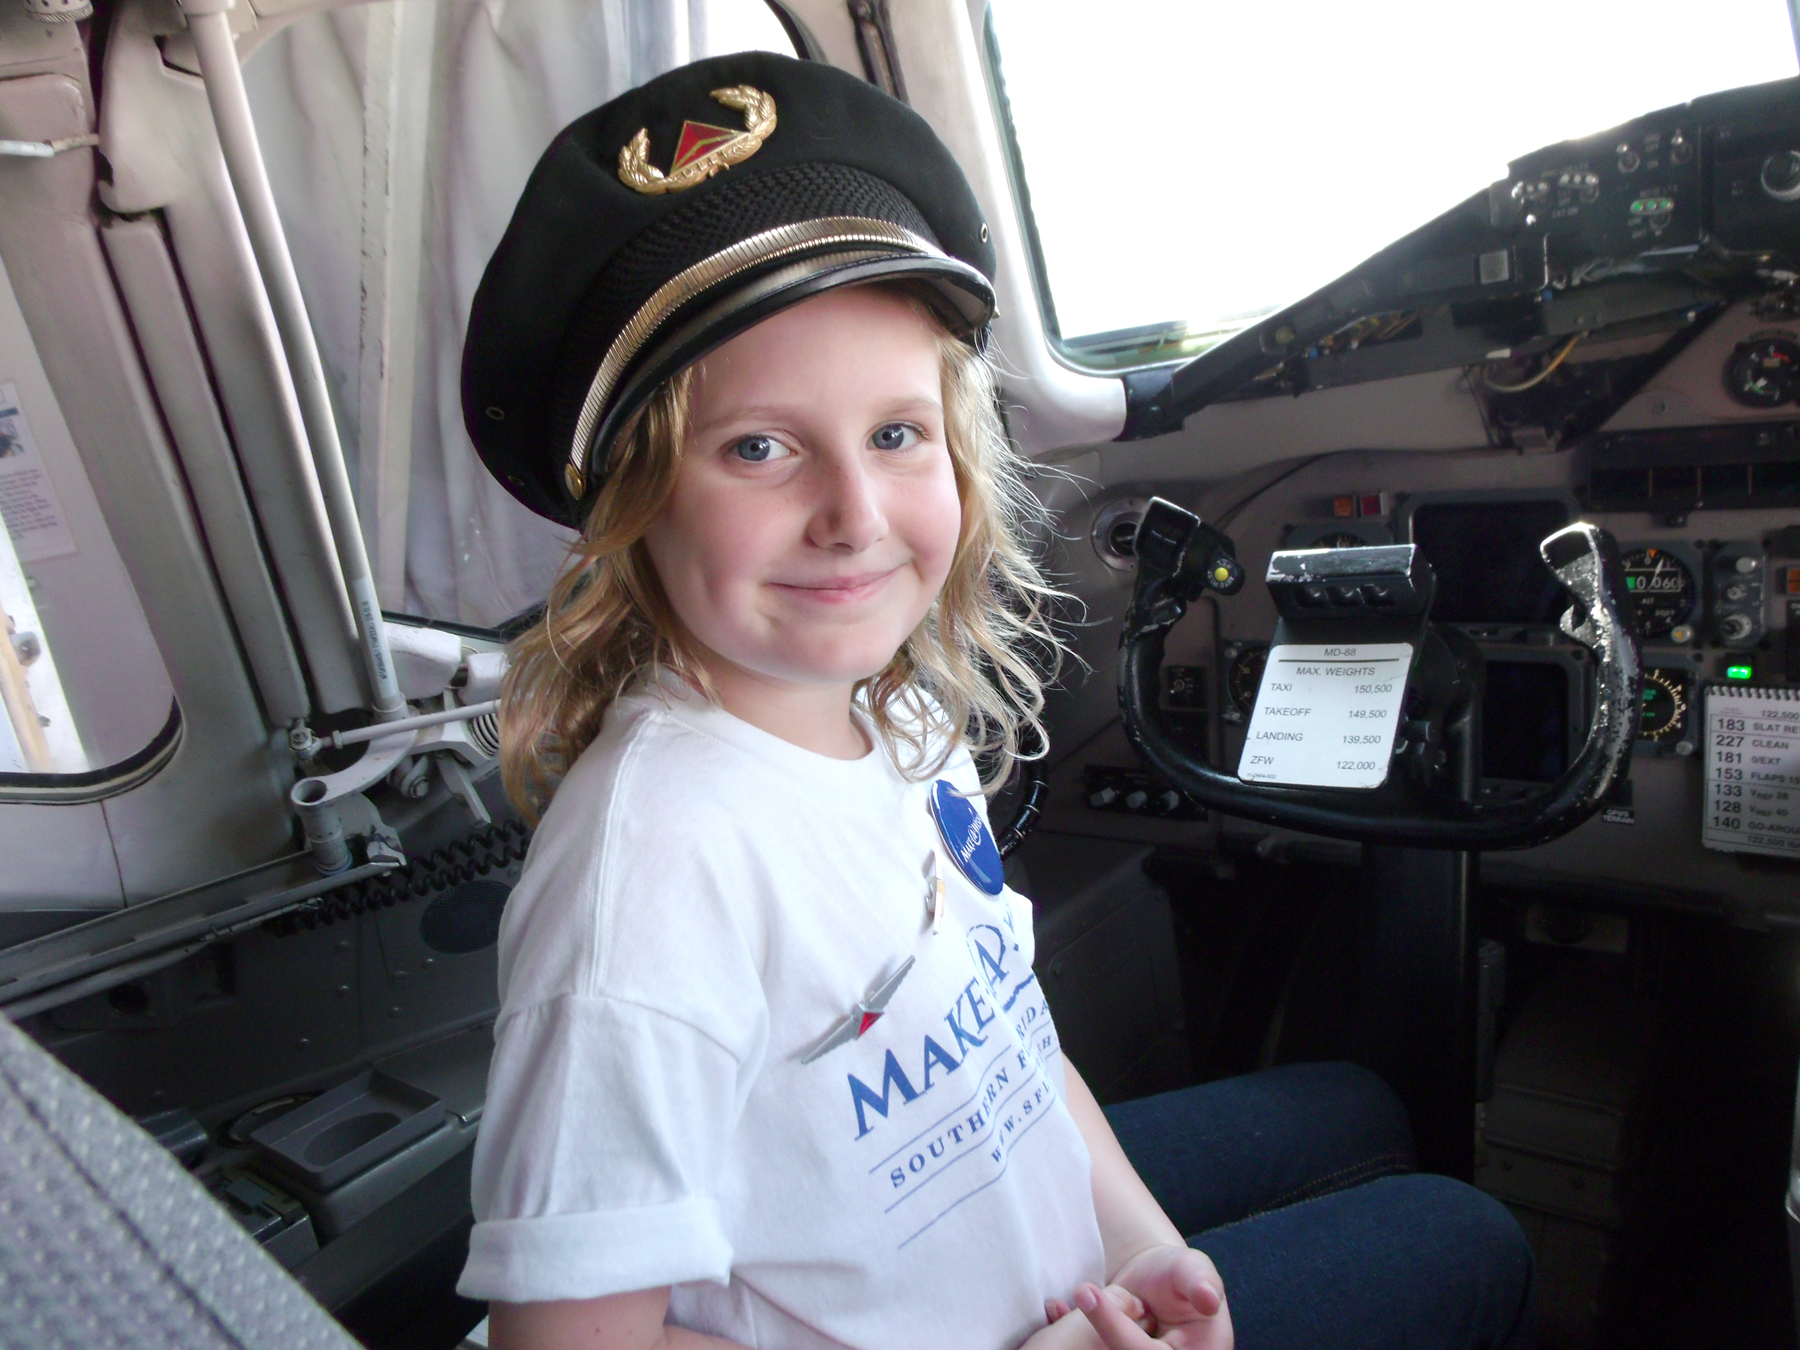 Simone, a 10-year-old wish kid from Southern Florida who has a life-threatening nervous disorder, poses for a quick photo in the cockpit before her flight to New York City.